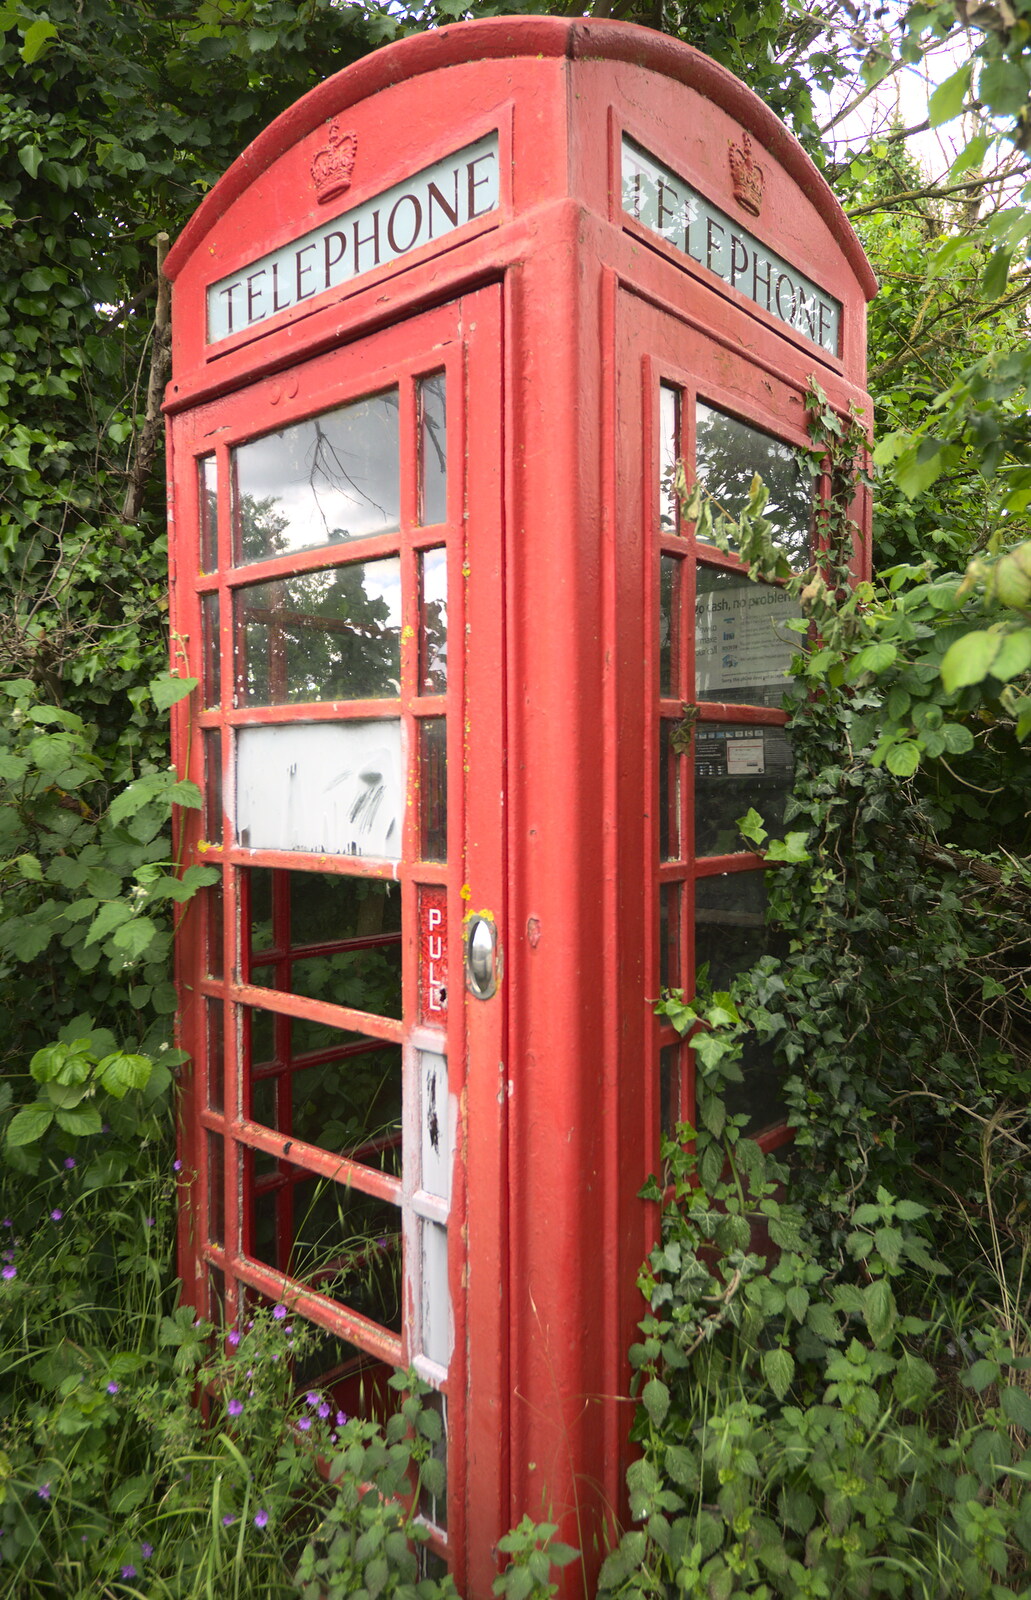 A derelict K6 phone box near Holton, Suffolk from A Night at the Crown Hotel, Southwold, Suffolk - 13th June 2012